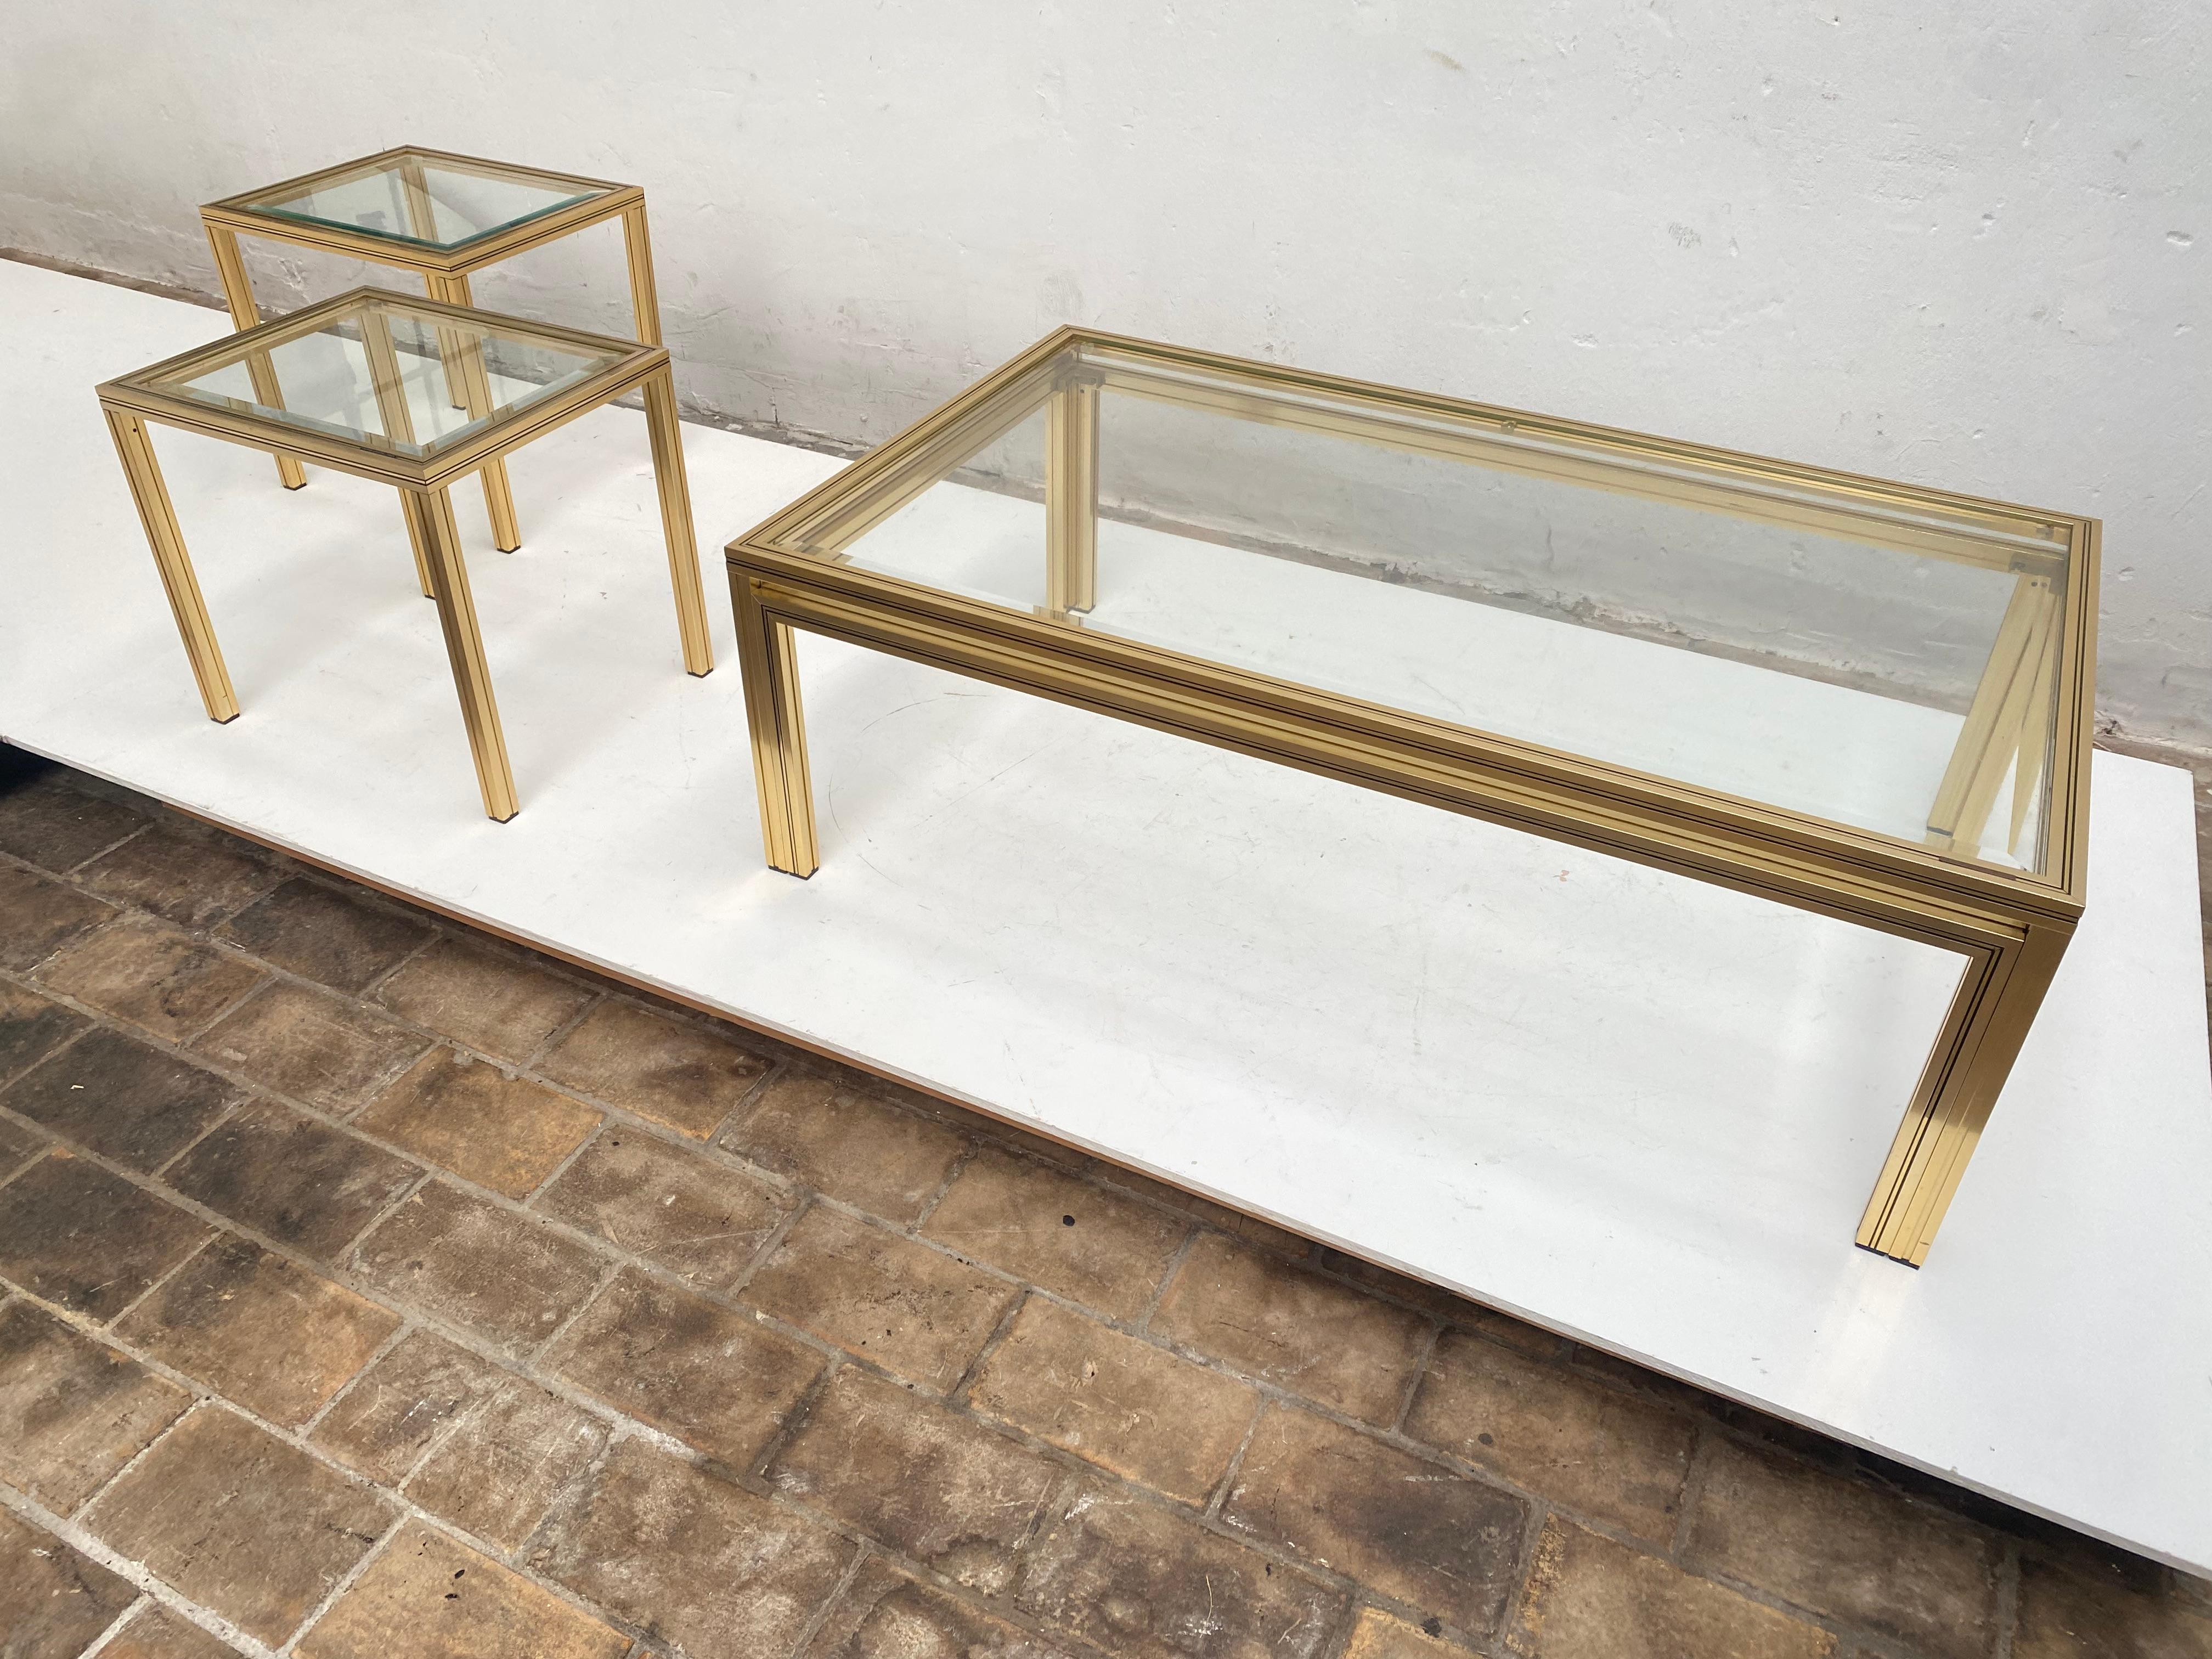 Hollywood Regency 1970's Pierre Vandel Paris Coffee Table + 2 Side Tables Gold Anodized Aluminium For Sale